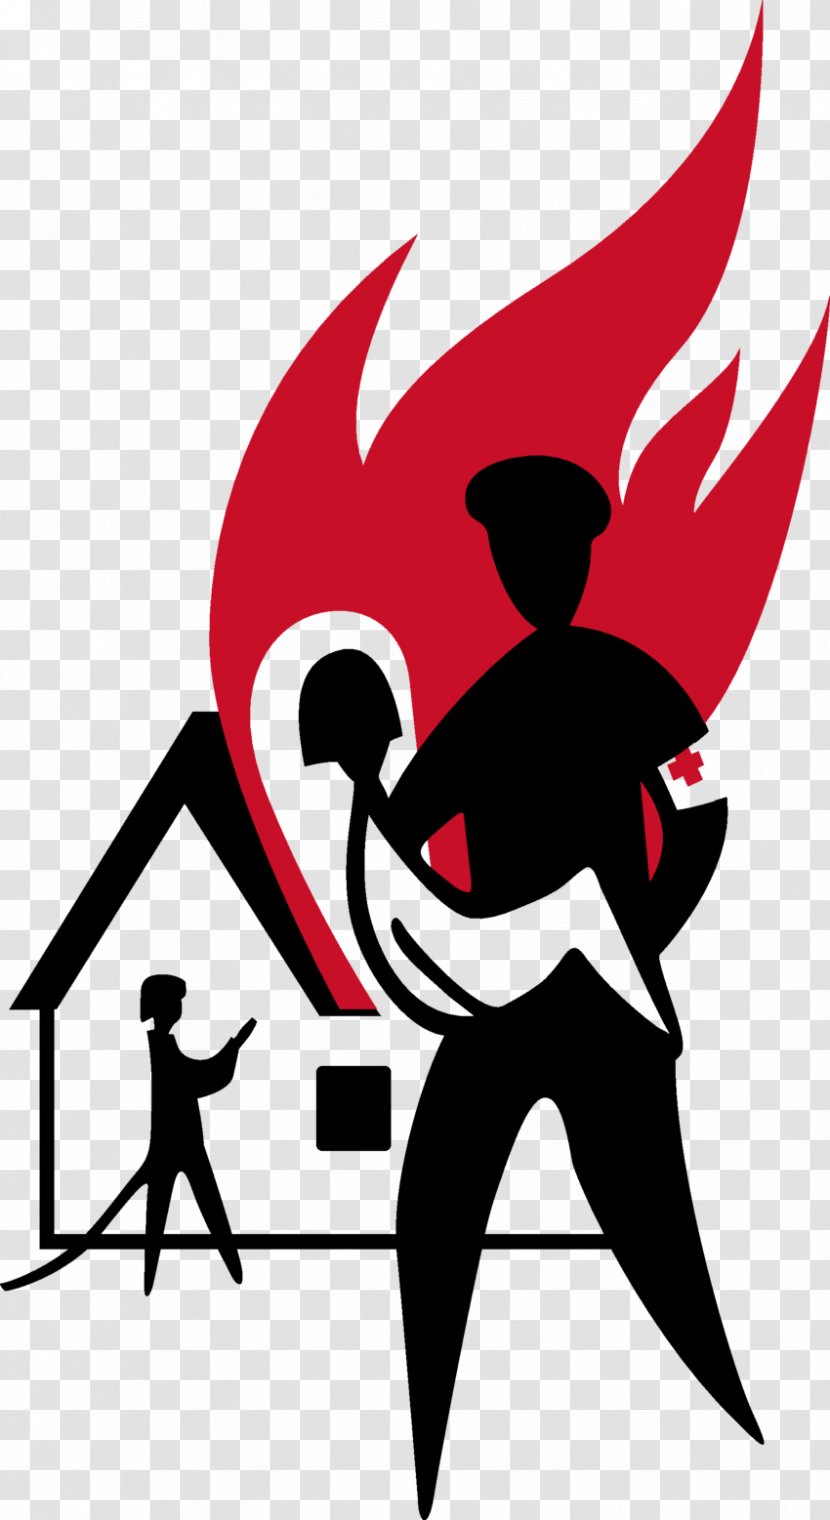 Art Silhouette - Burning House - Firefighter Transparent PNG